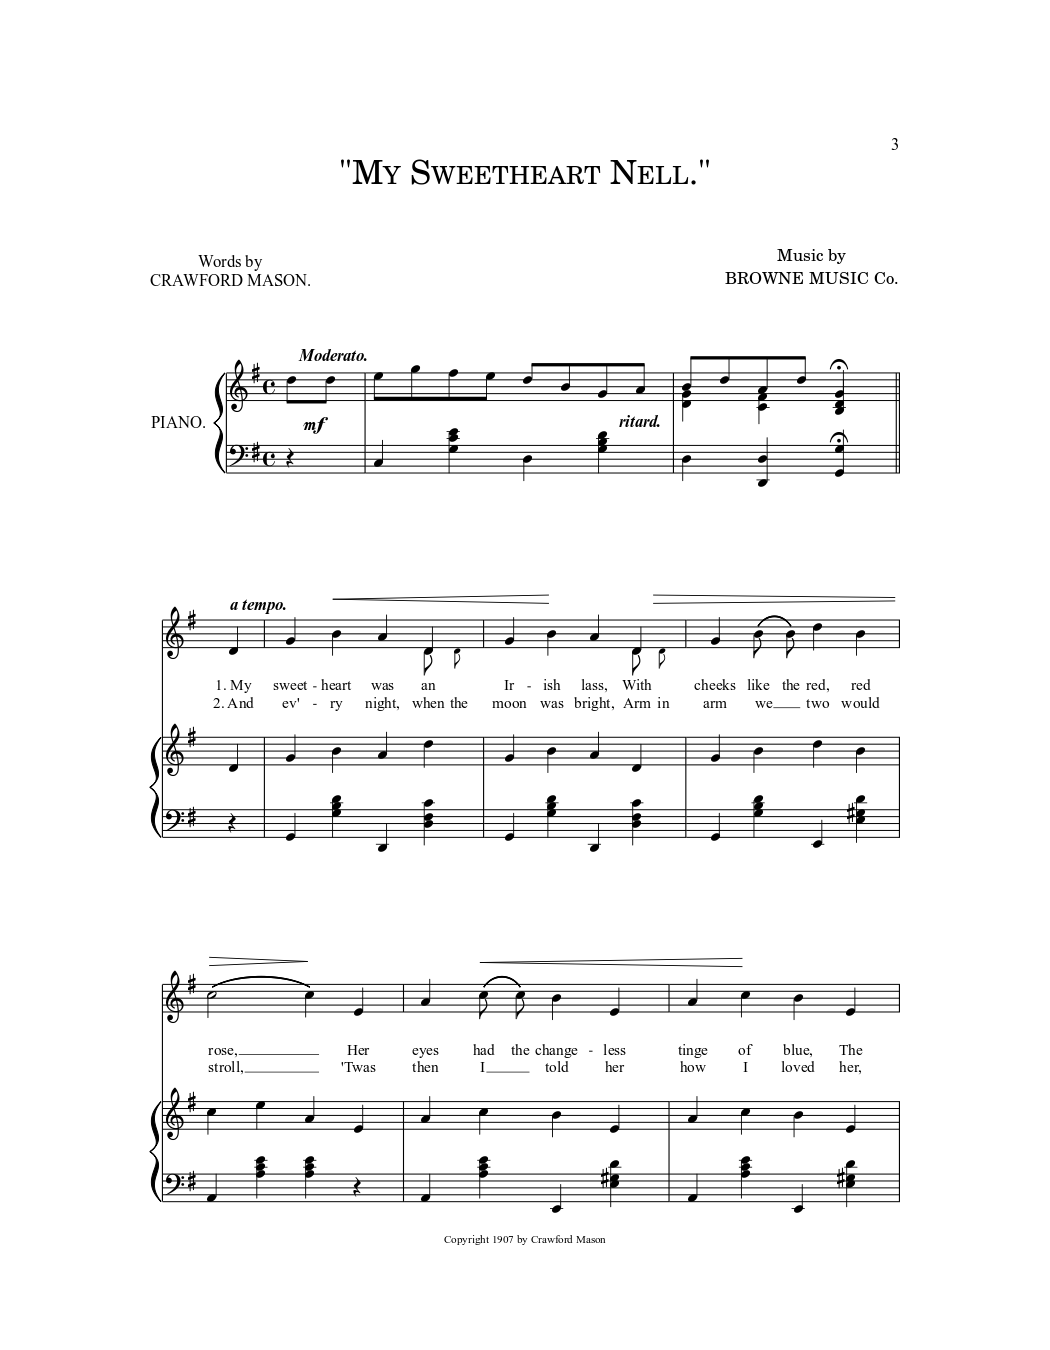 MY SWEETHEART NELL." Sheet music for Piano (Solo) | Musescore.com